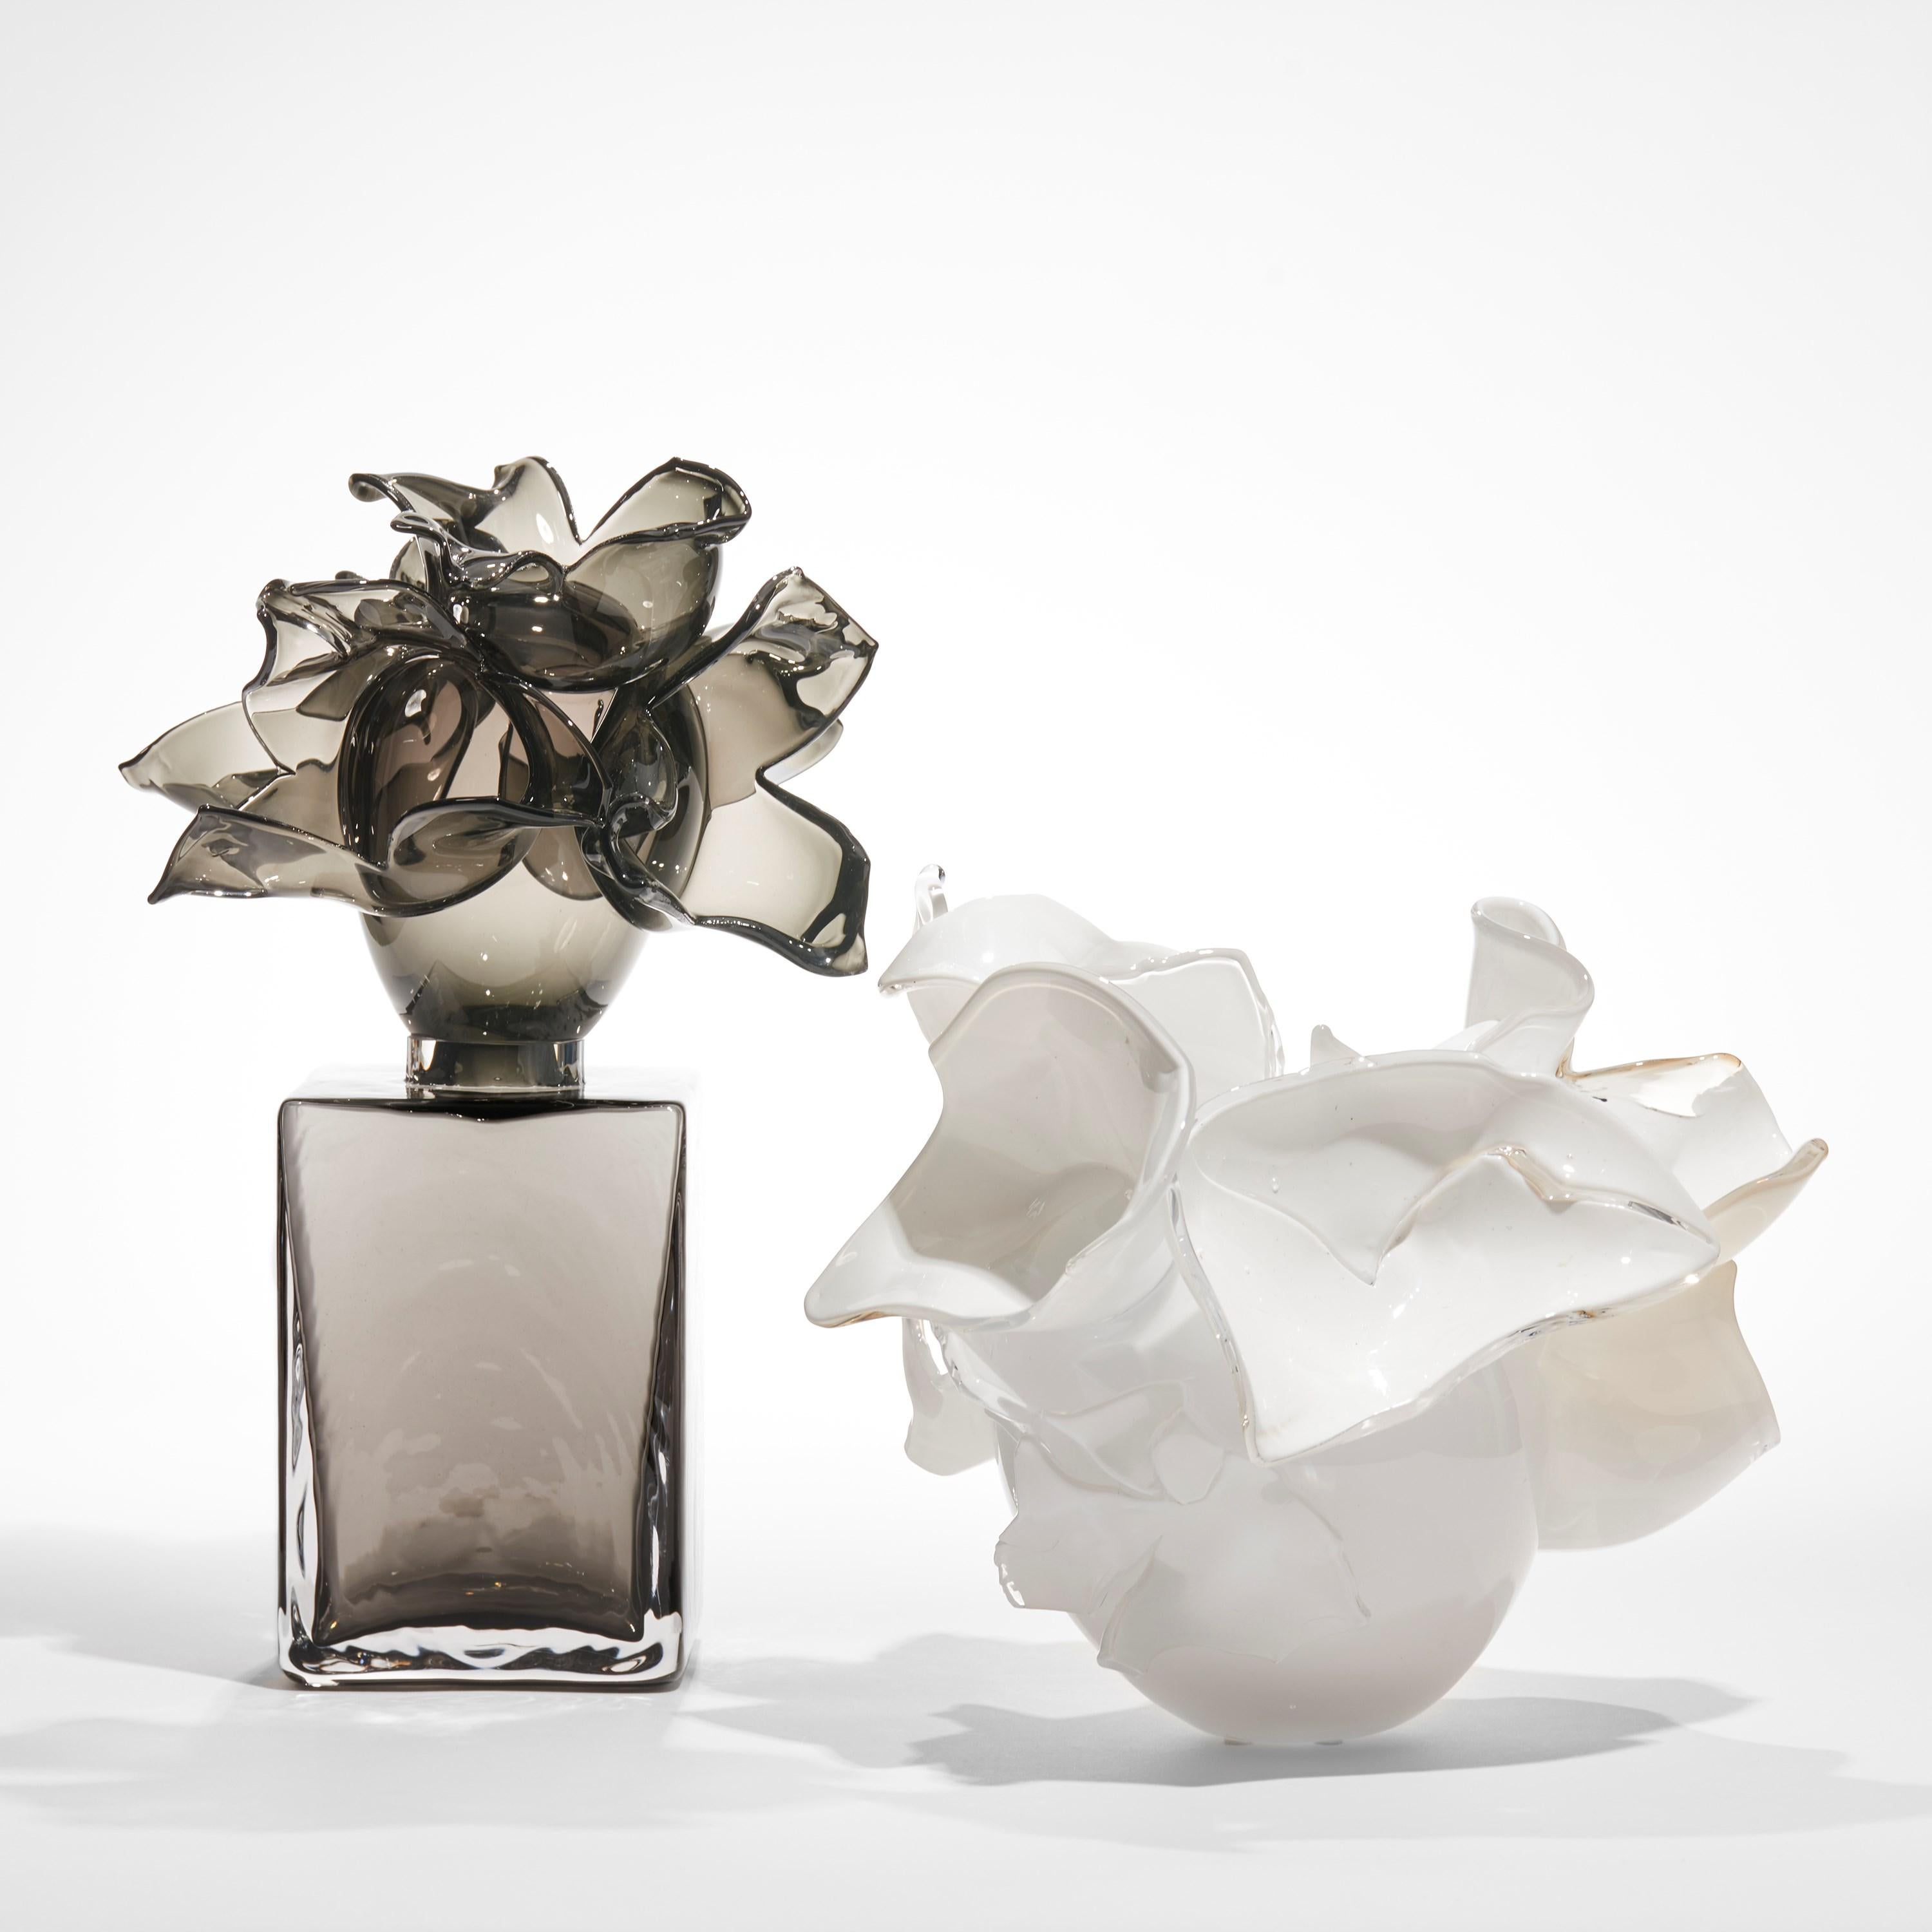 Hand-Crafted Anemone in Grey, a limited edition Sculpted Glass Artwork by Lena Bergström For Sale